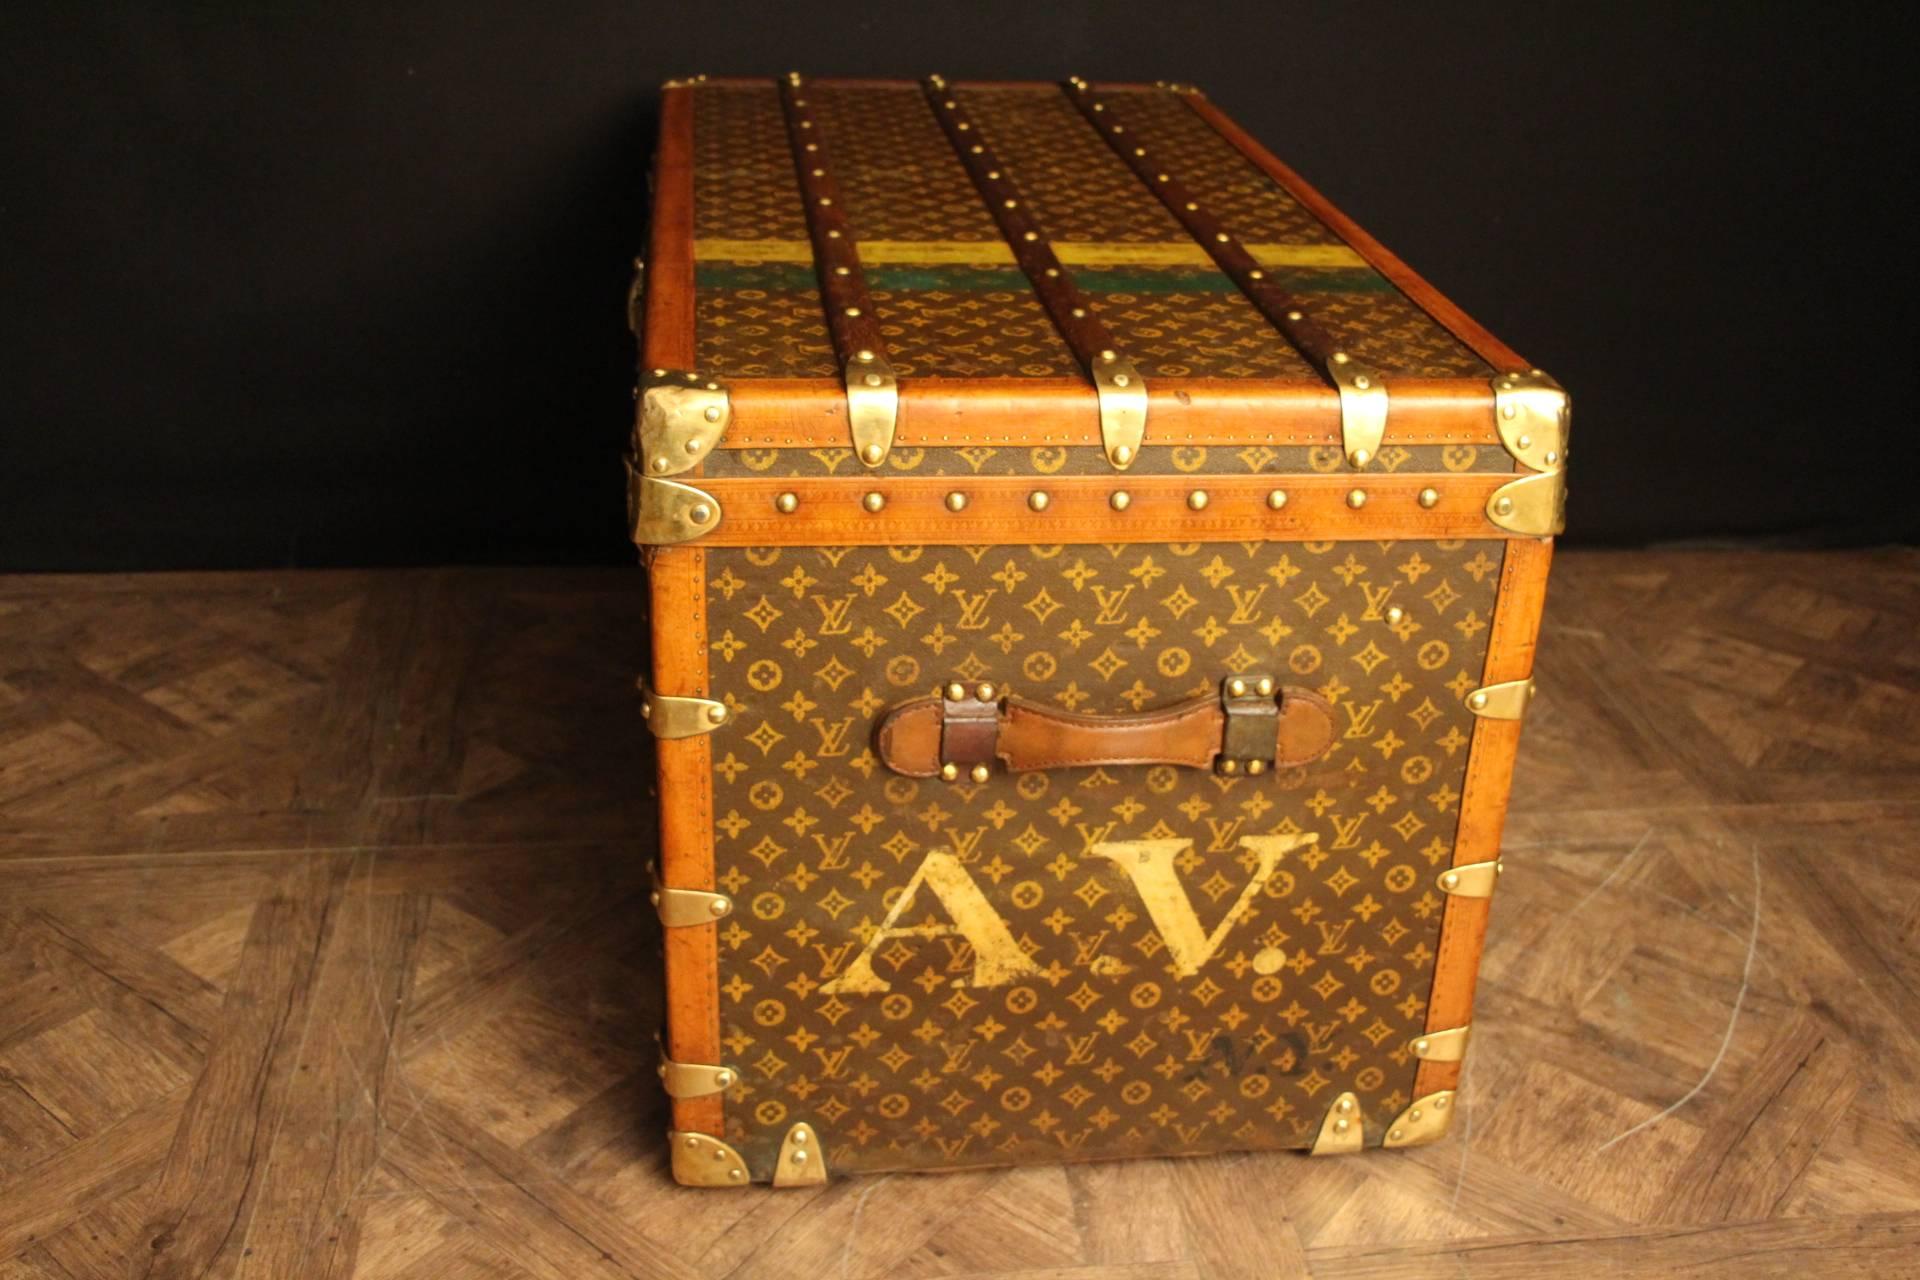 This beautiful Louis Vuitton courier steamer trunk features stenciled monogram canvas, lozine trim, brass locks and corners as well as leather handles. All stamped LV brass studs.
It has got a beautiful warm patina.
As to its interiors, it is all